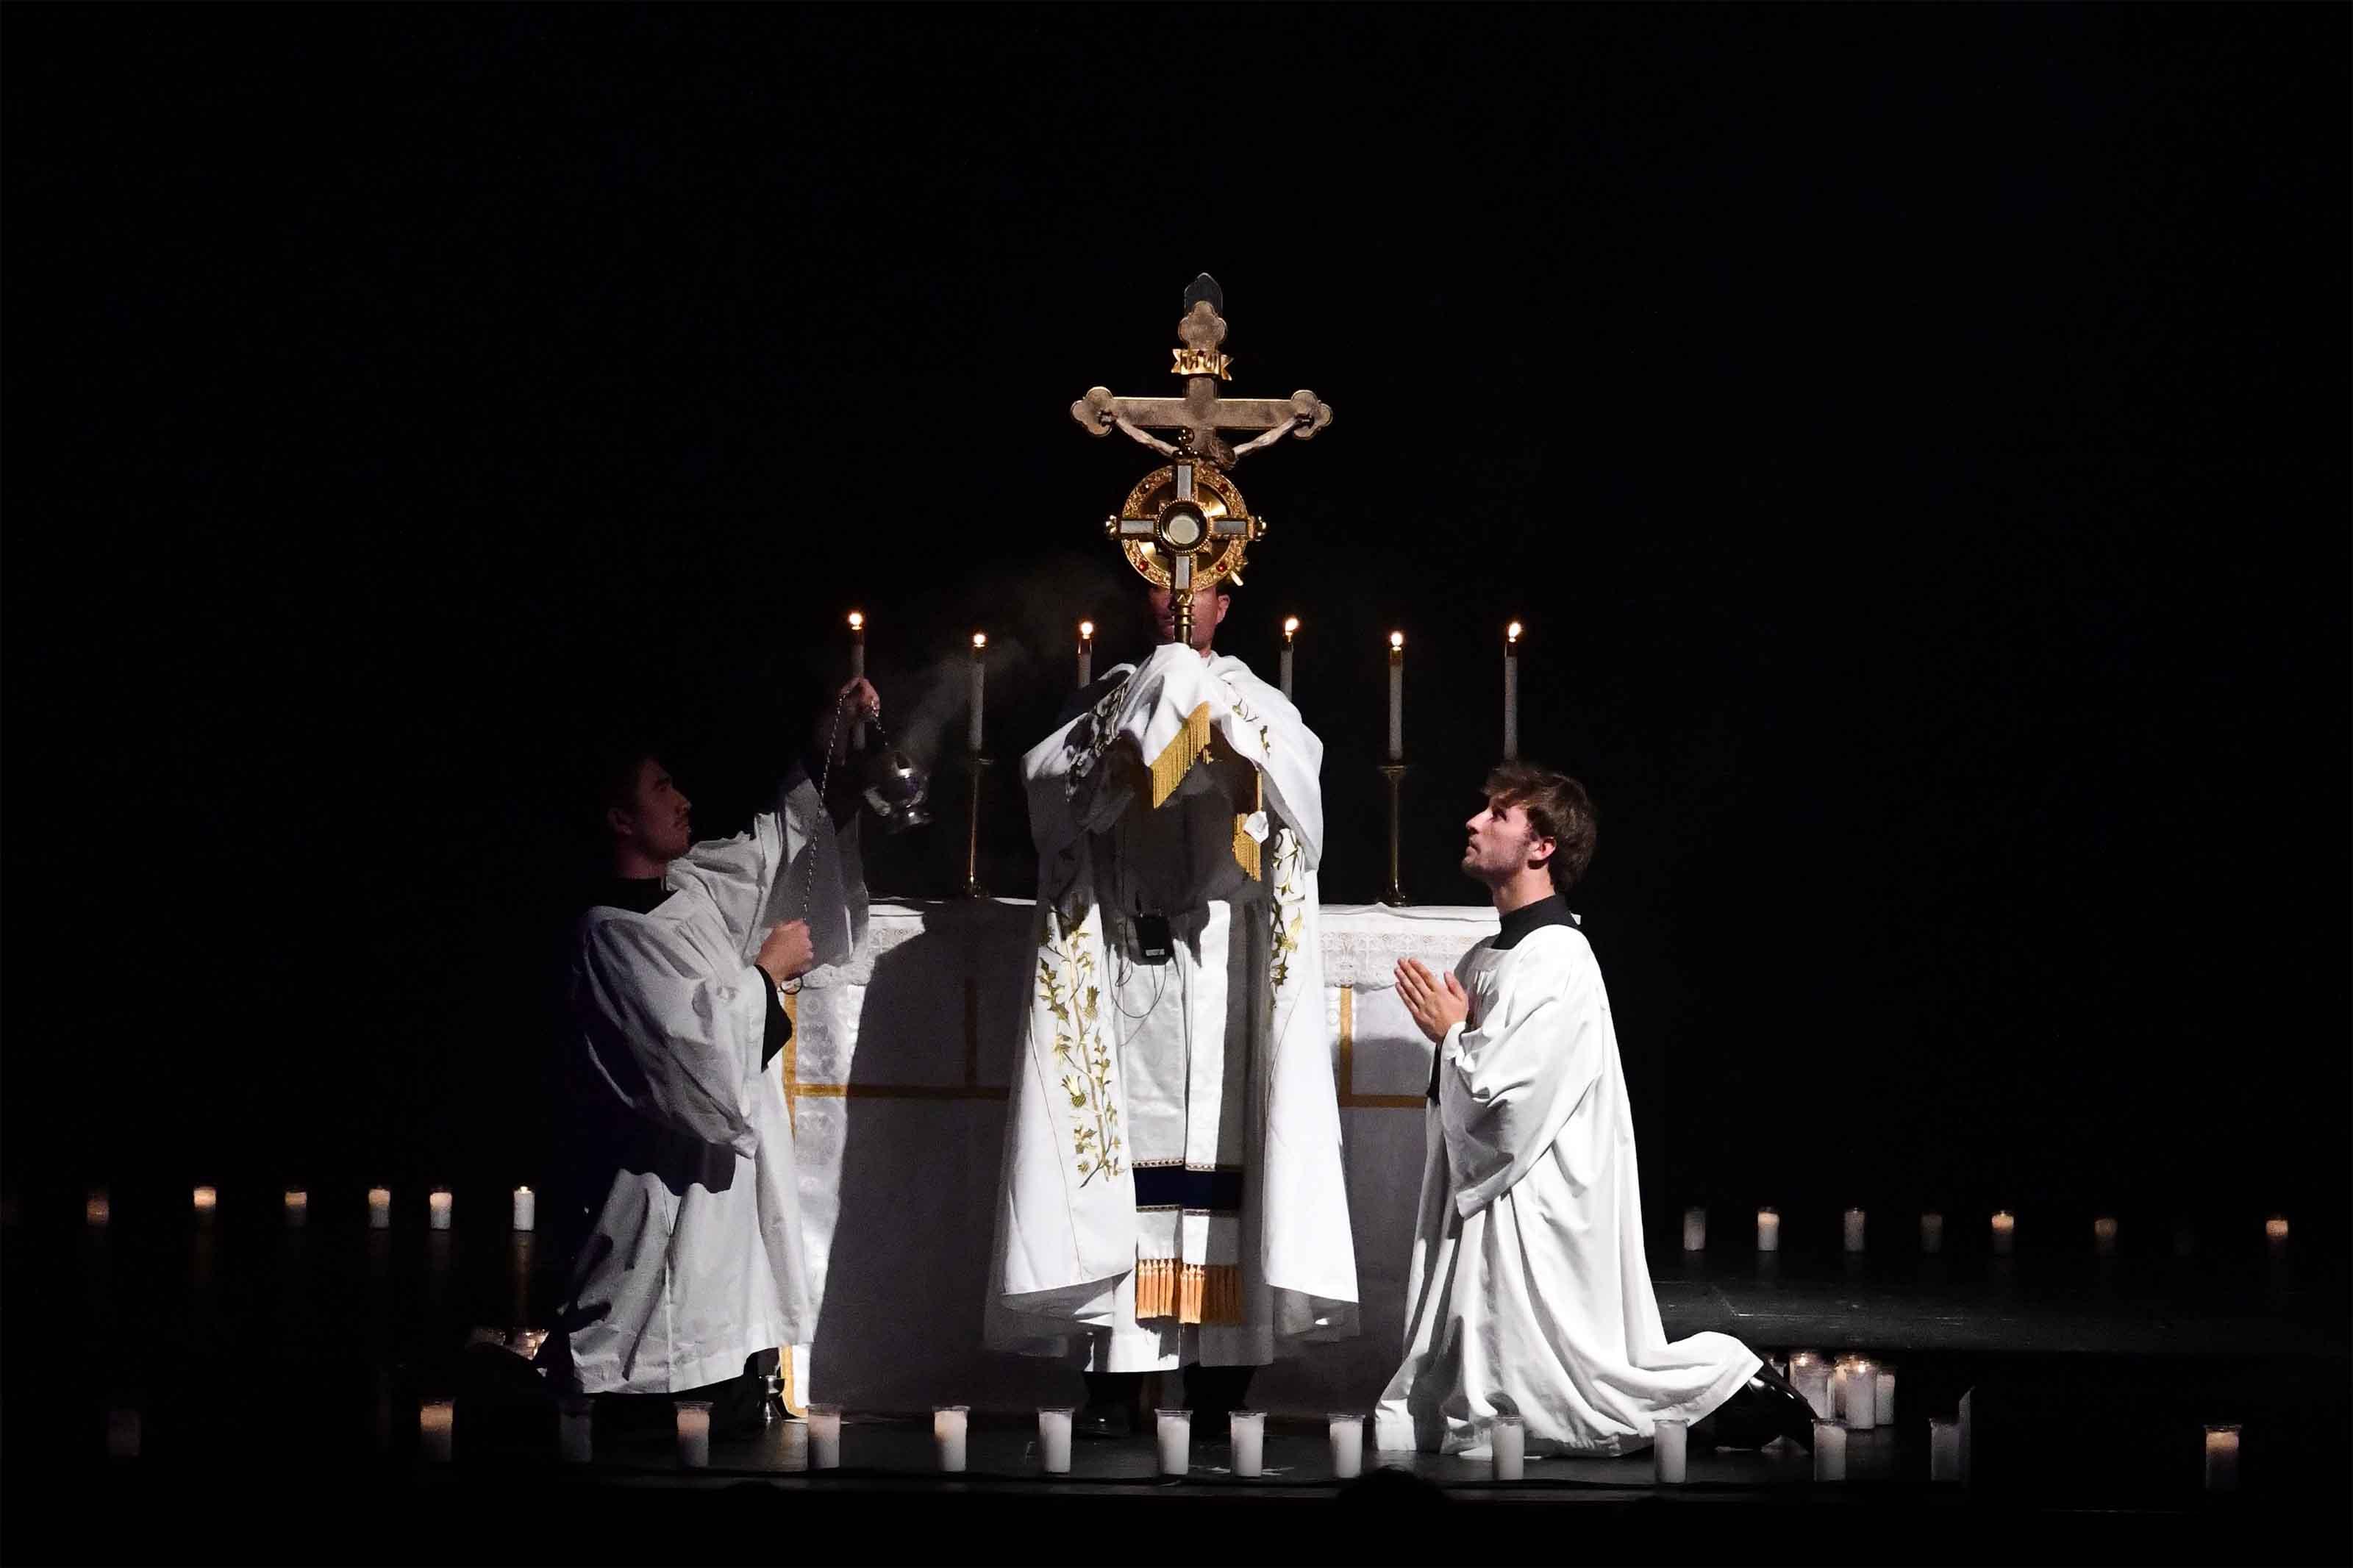 A priest elevates the monstrance during Eucharistic adoration